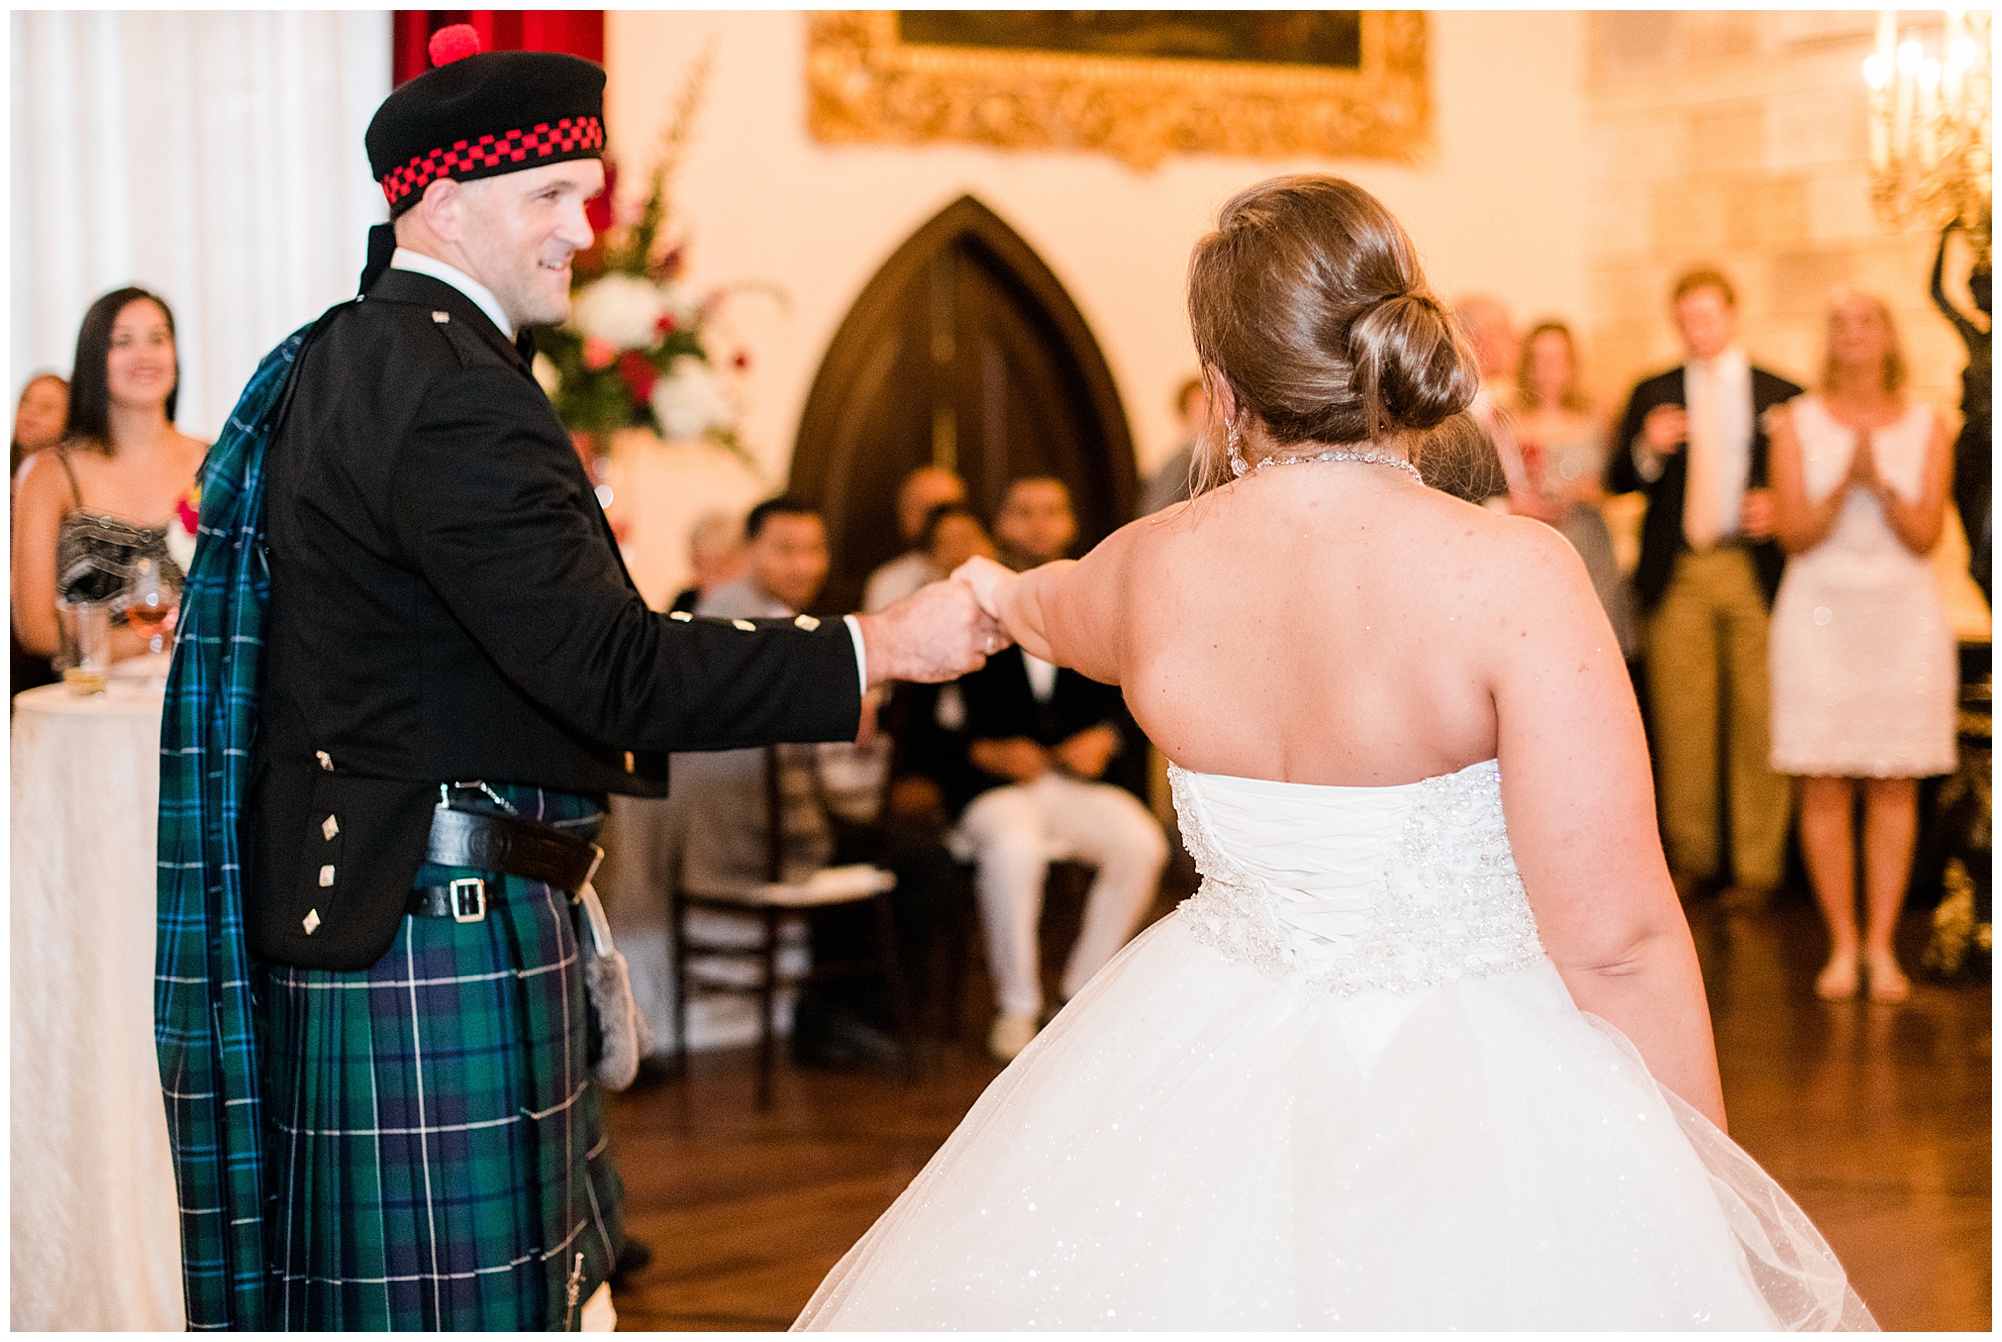 couple dancing in dover hall estate ballroom indoors at reception in the fall in september 